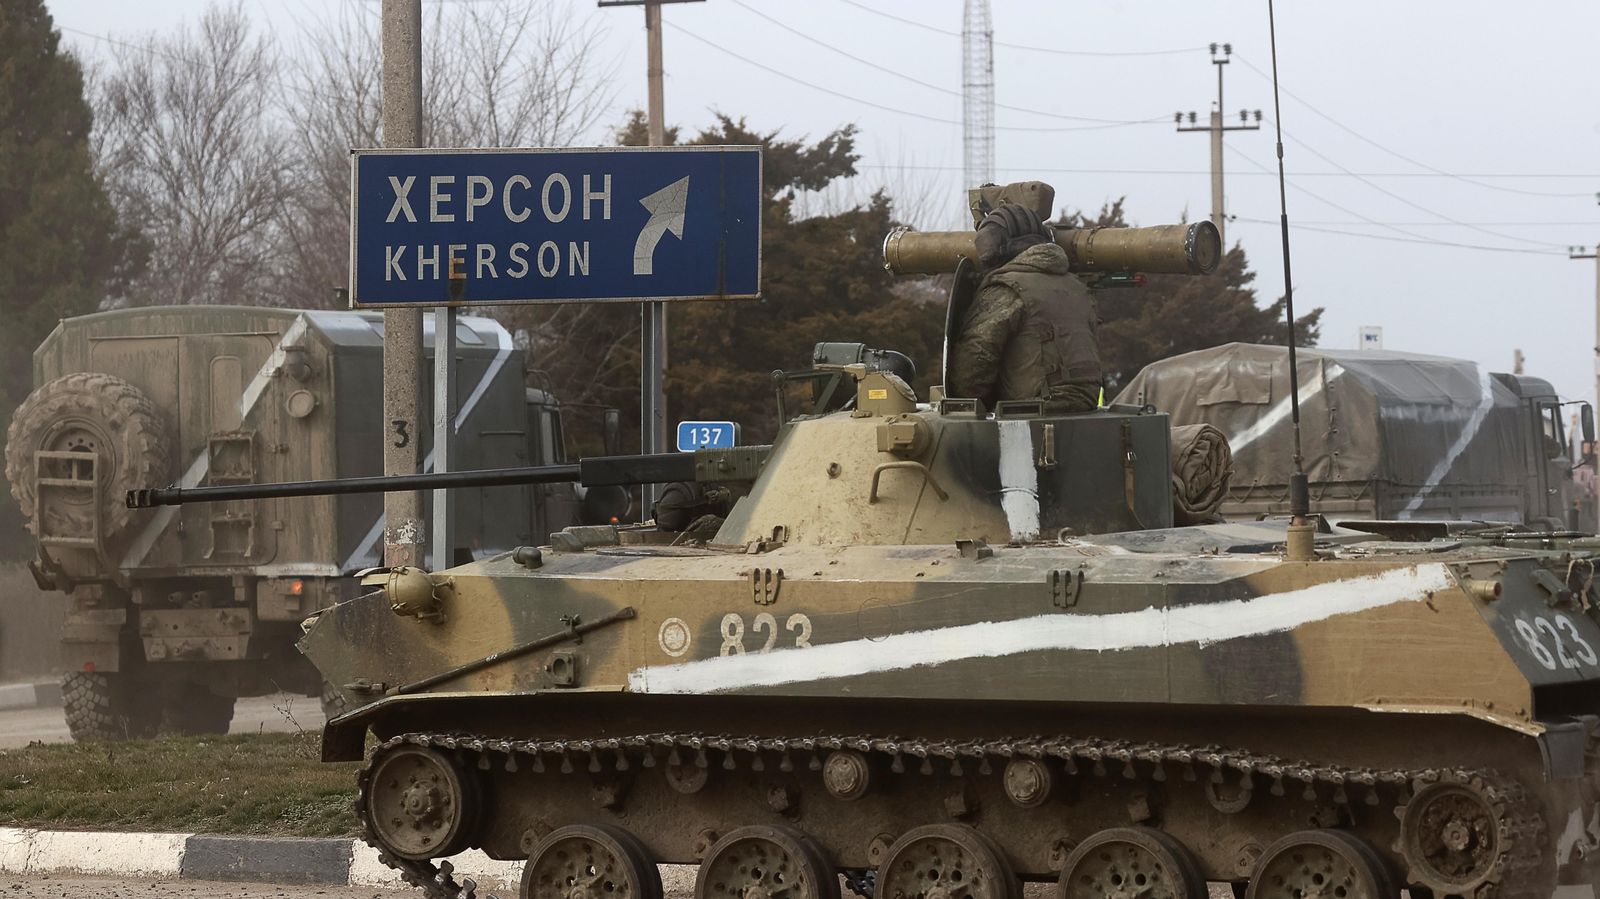 Most Trained and Most Capable russian Units Are Currently in Kherson